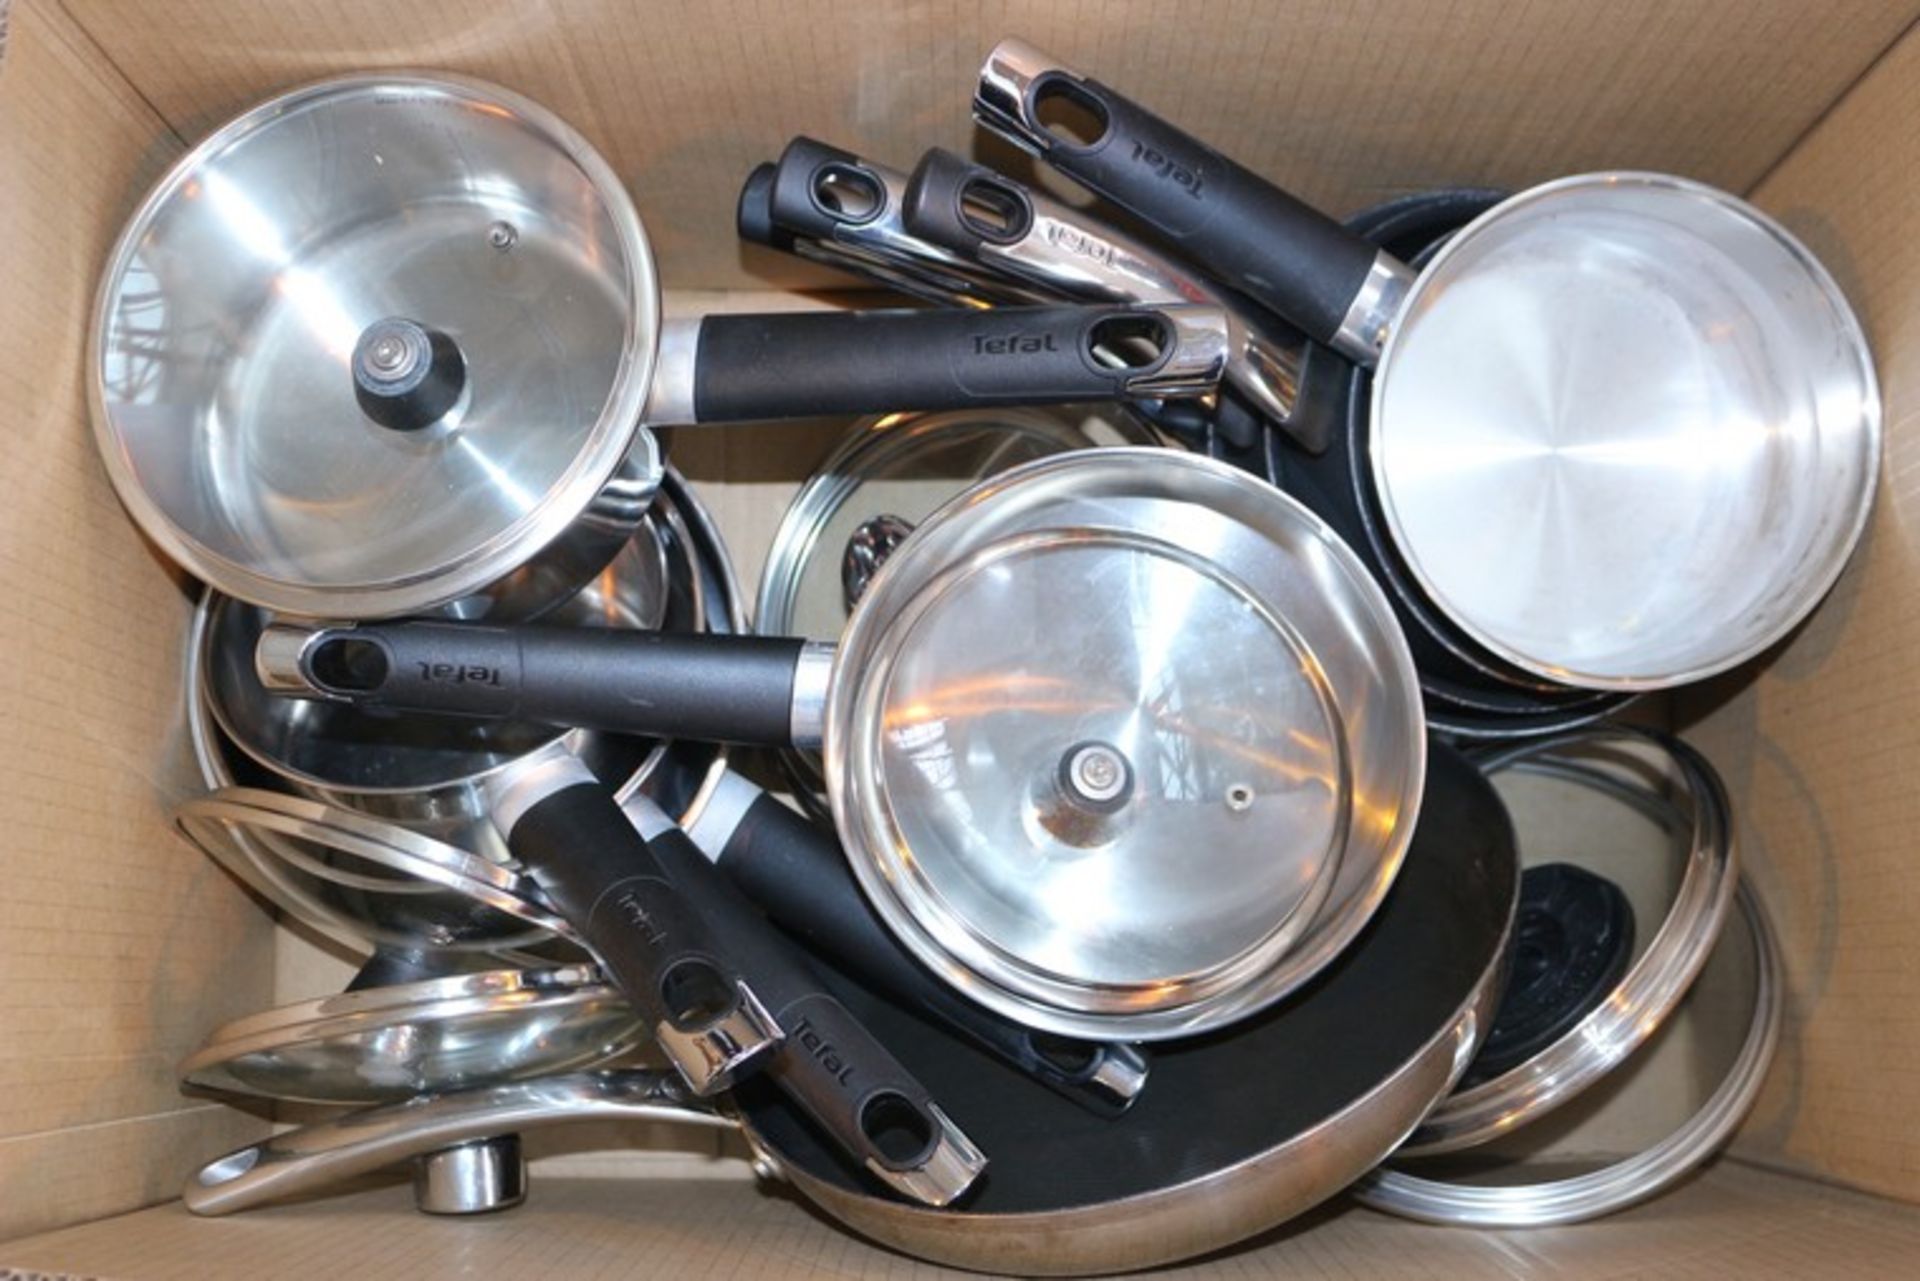 10 x ASSORTED PANS BY TEFAL (22.5.17) *PLEASE NOTE THAT THE BID PRICE IS MULTIPLIED BY THE NUMBER OF